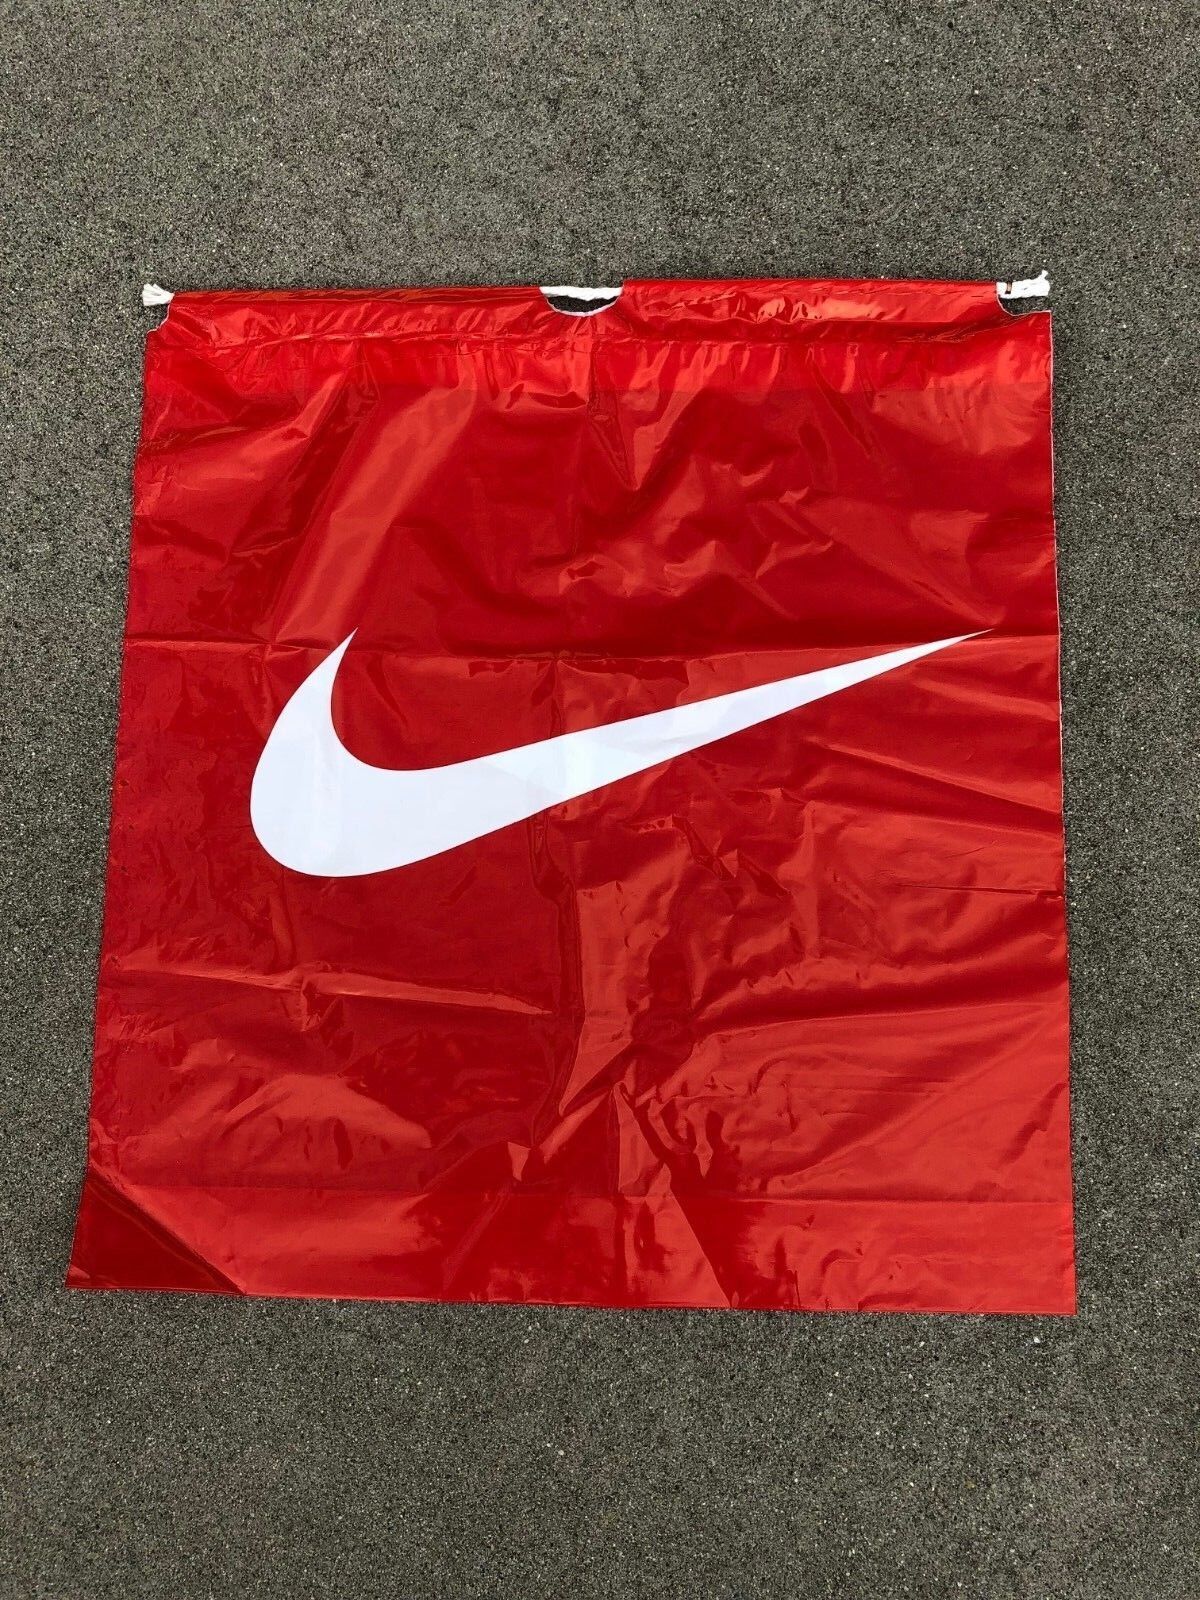 NIKE Vintage Ad Poly Shopping Bags 20.5